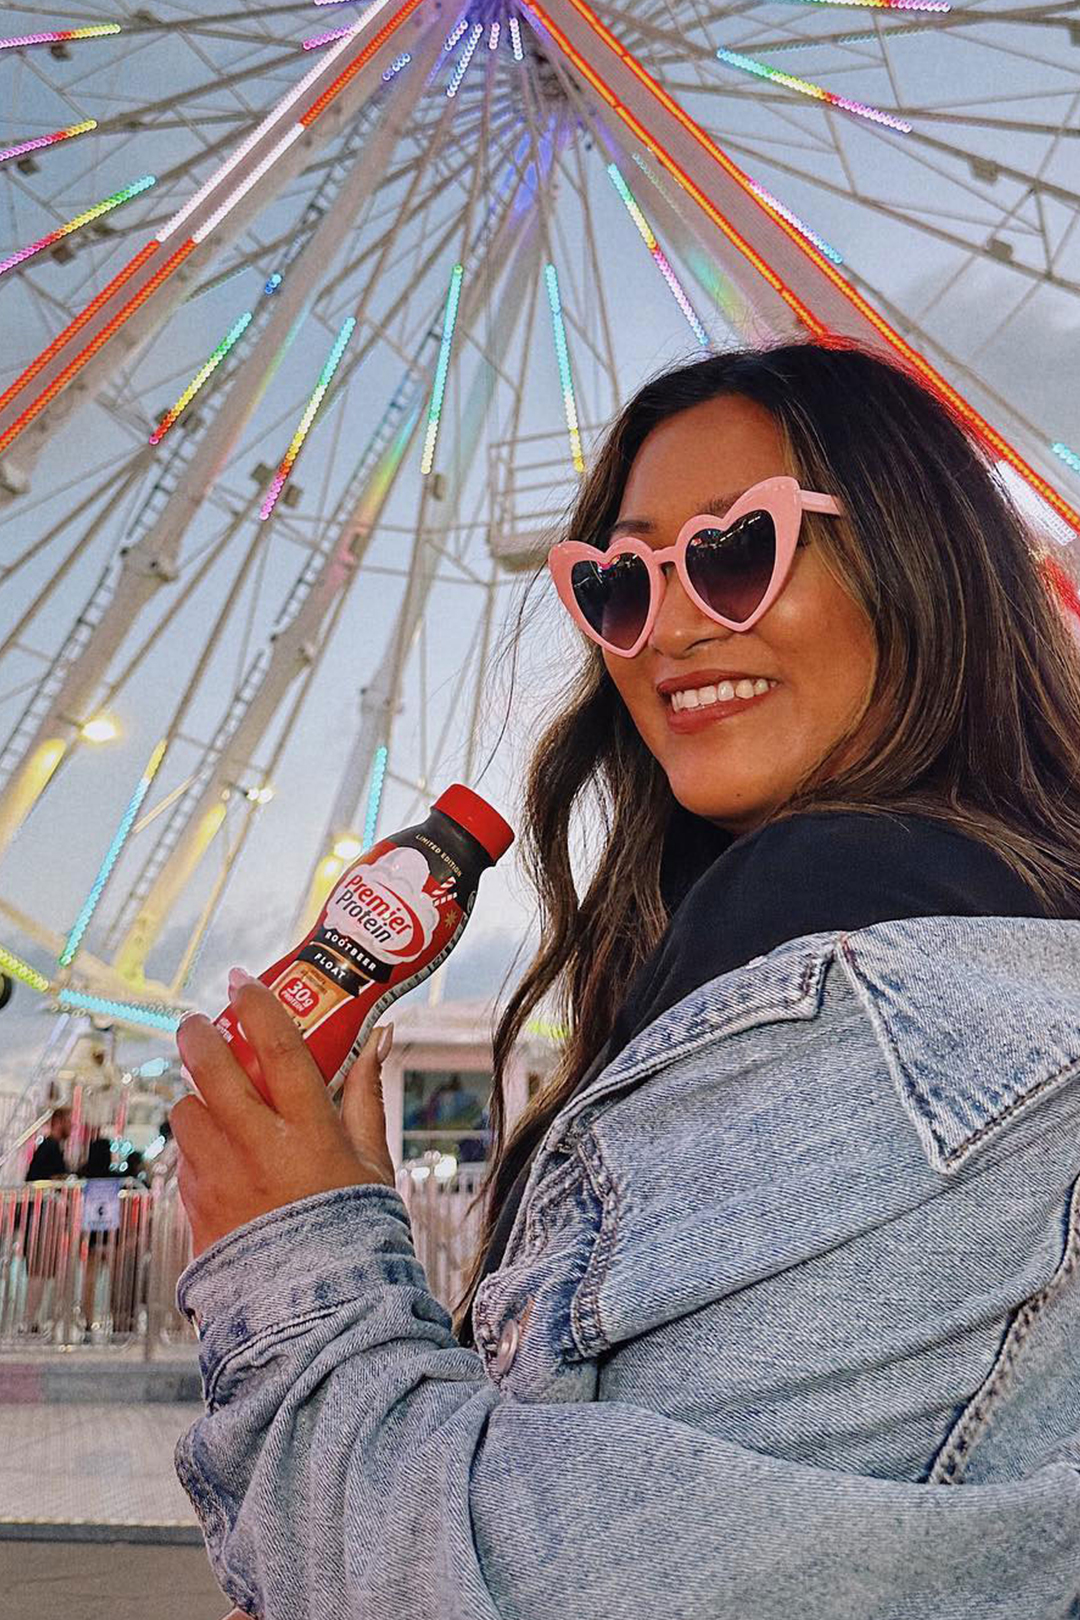 Woman in sunglasses holding a bottle of Premier Protein Root Beer Float in front of a ferris wheel.